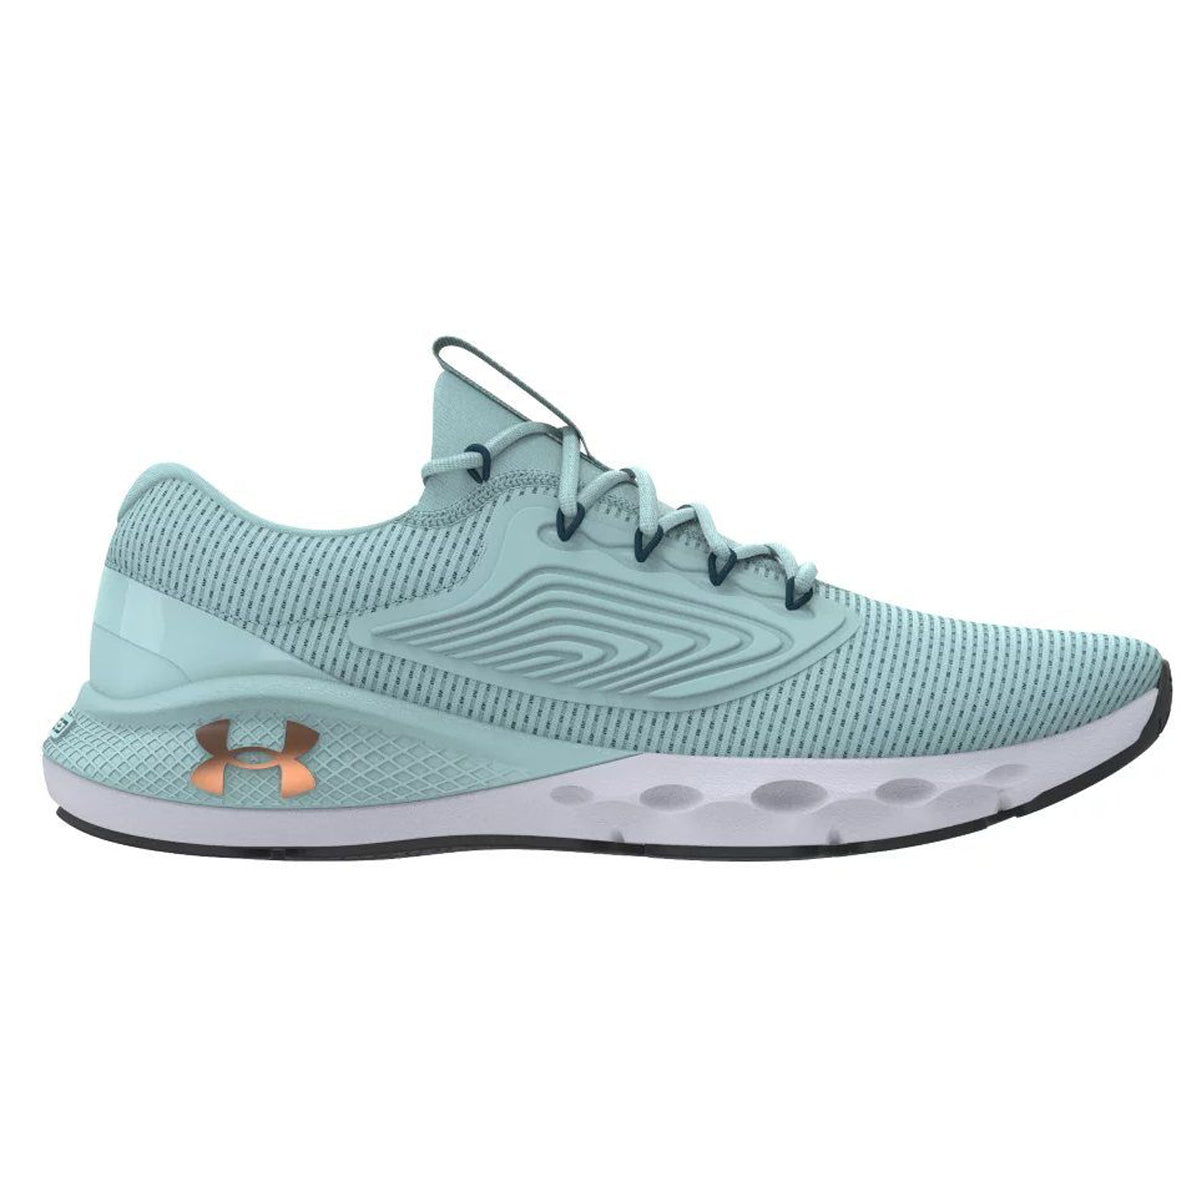 Shoes - Under Armour Women's Charged Vantage 2 Running Shoes